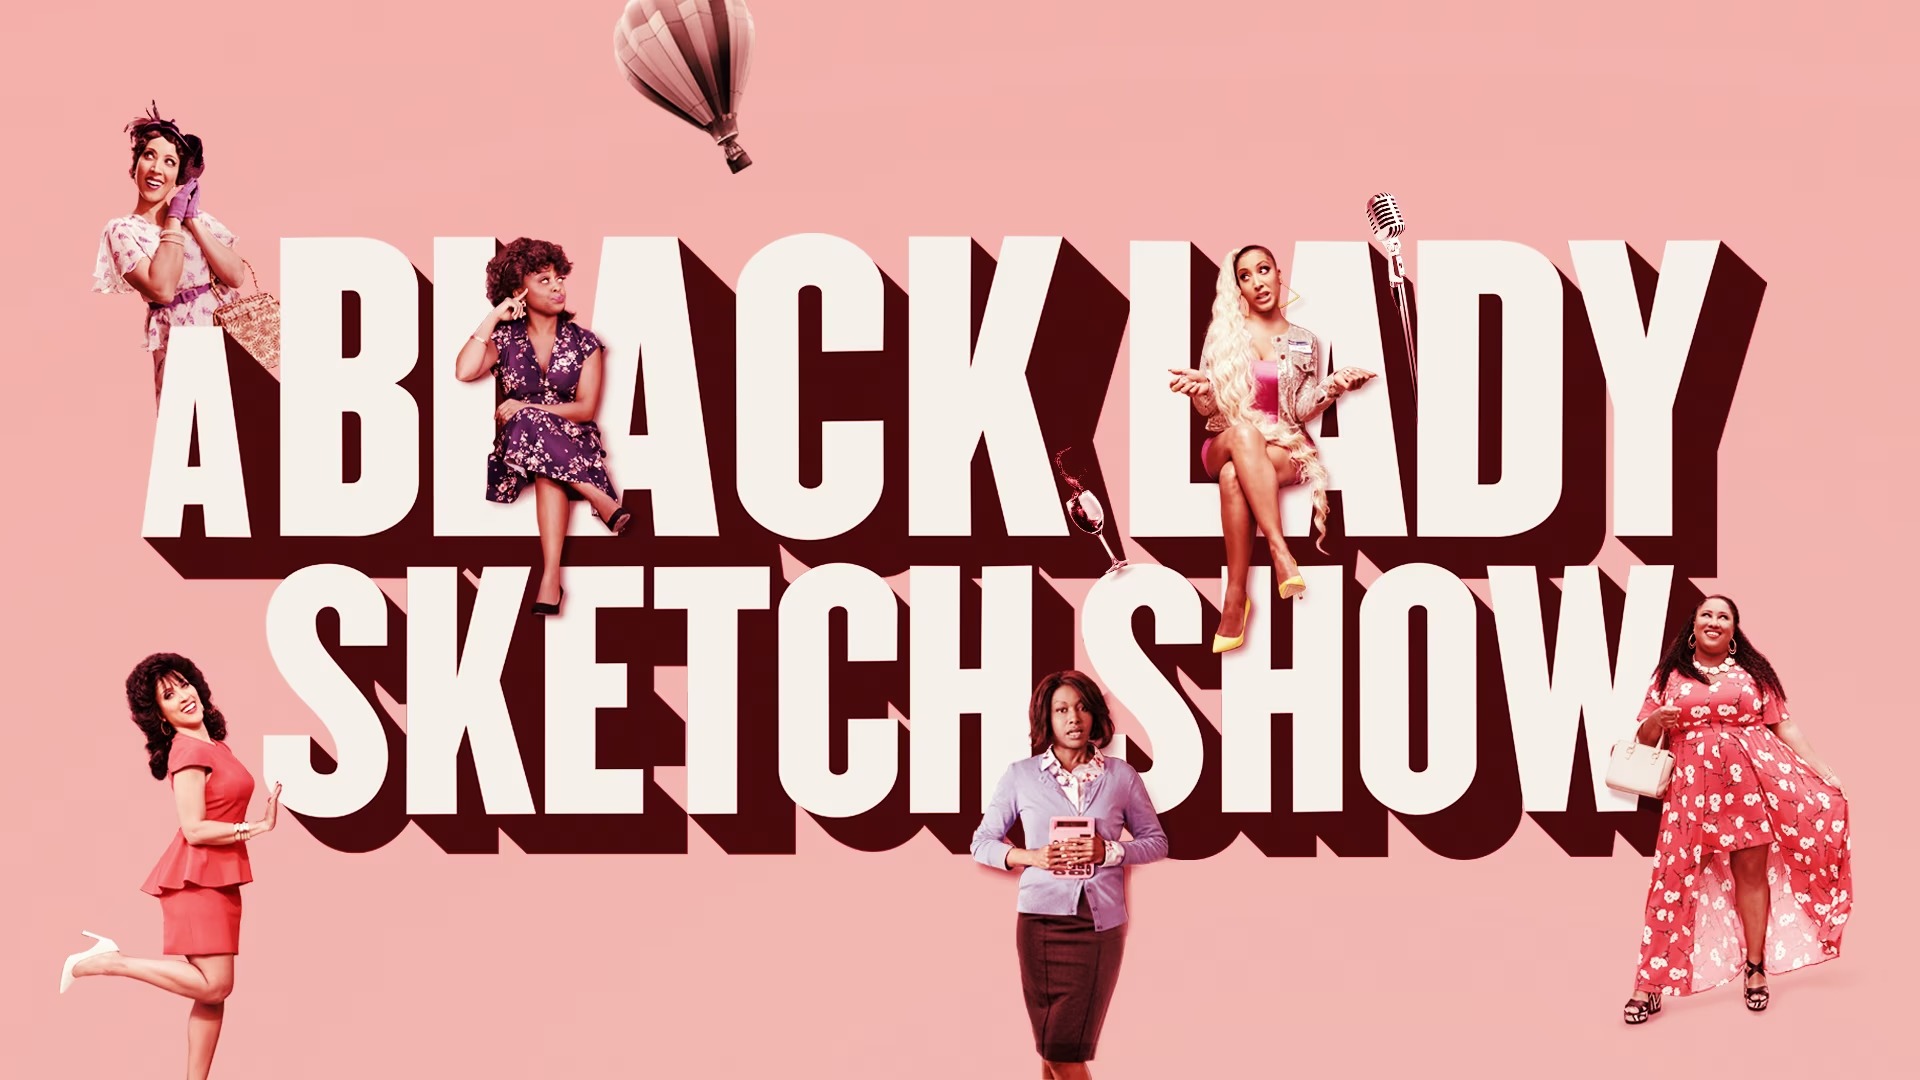 #A Black Lady Sketch Show: Cancelled on HBO; No Season Five for Comedy Series